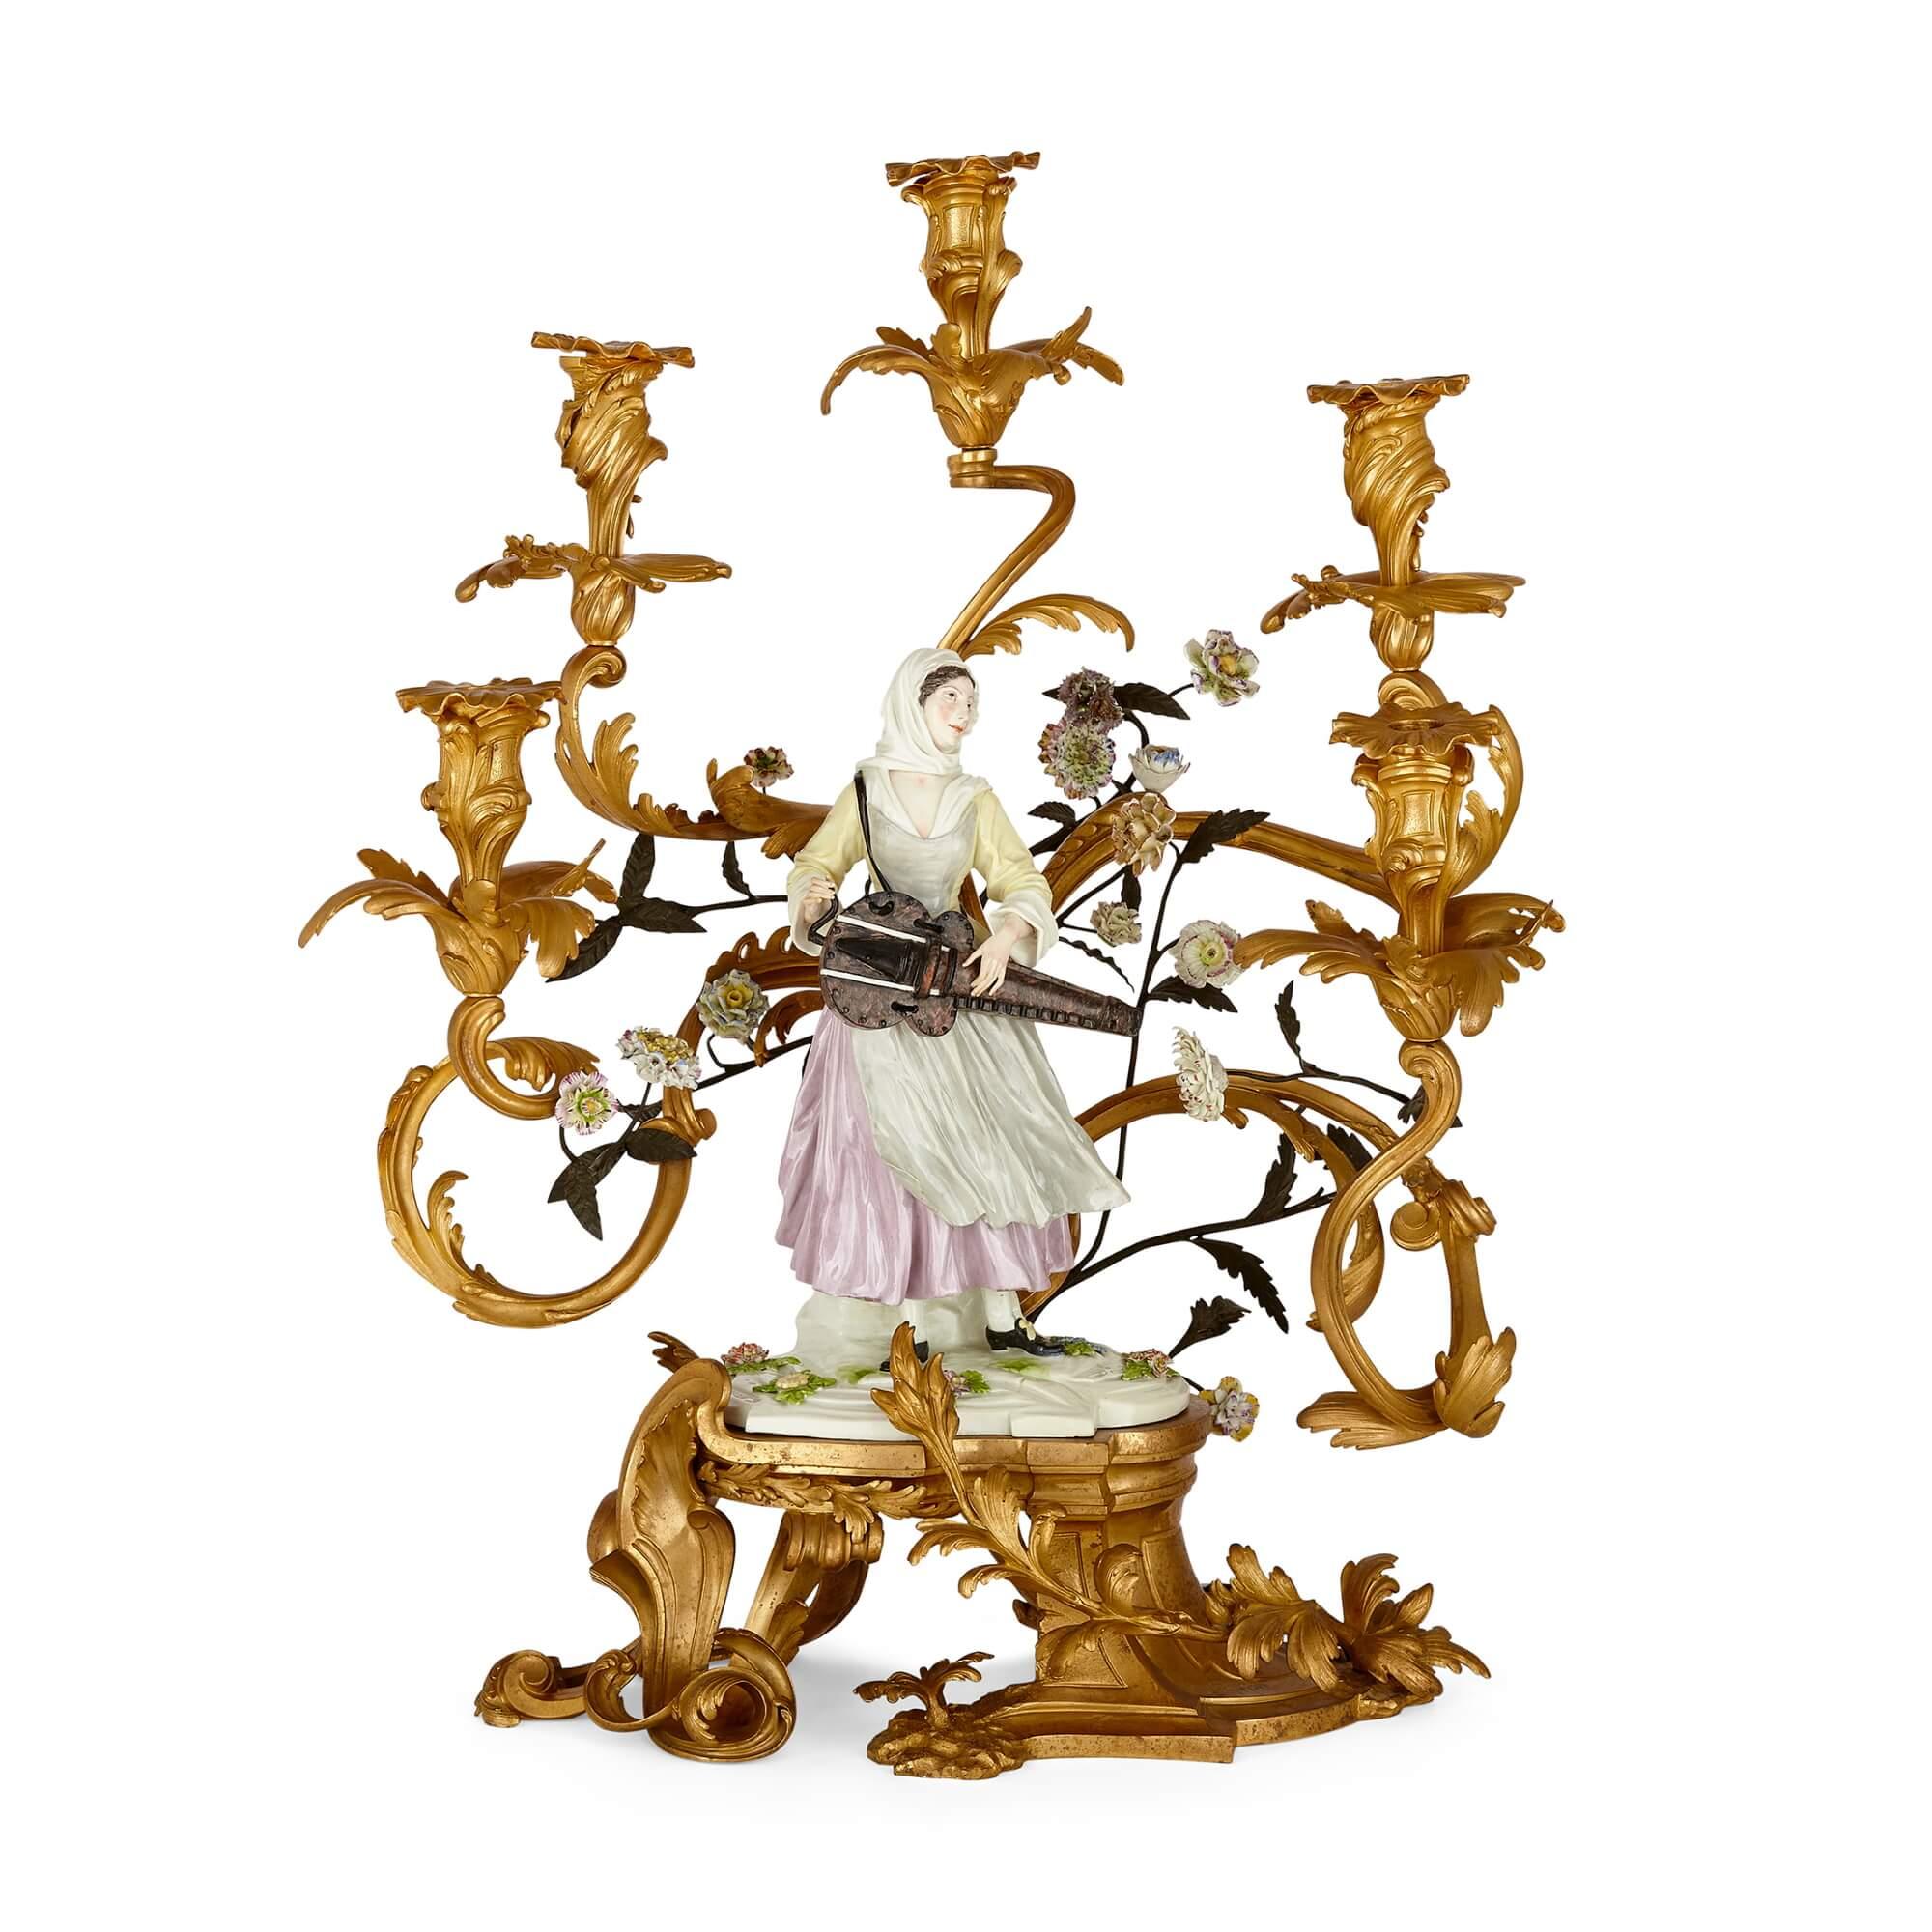 A pair of large Louis XV style gilt-bronze and Samson porcelain candelabra
French, Late 19th century
Measures: Height 68cm, width 54cm, depth 36cm

Crafted with great artistry and skill by the Samson porcelain manufactory in late nineteenth